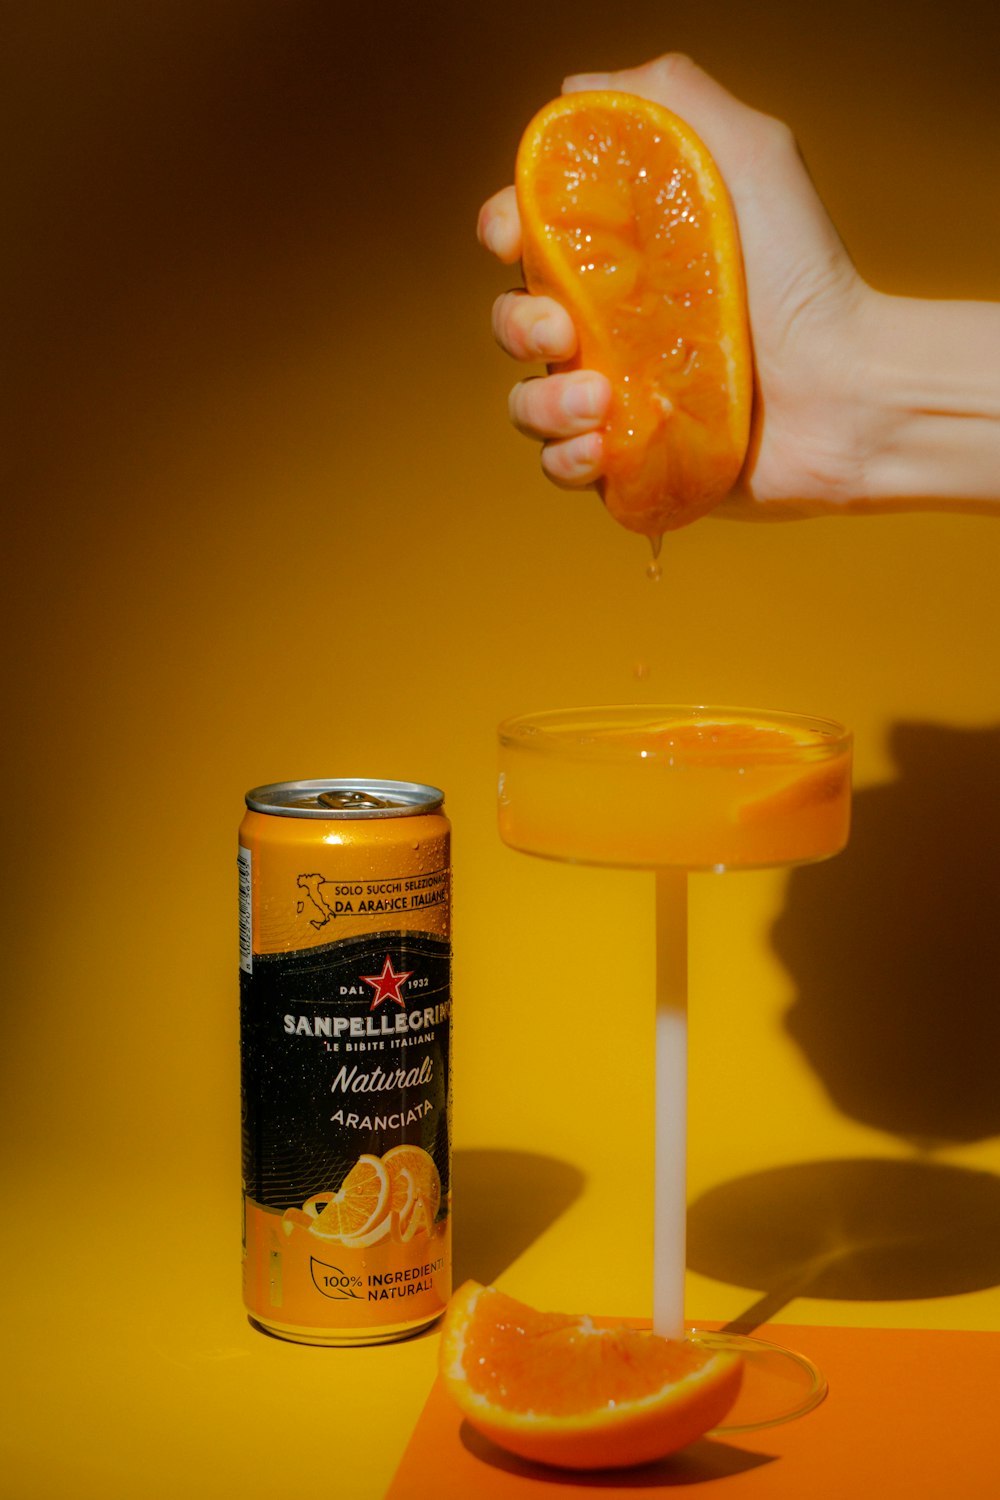 a can of orange juice being poured into a glass